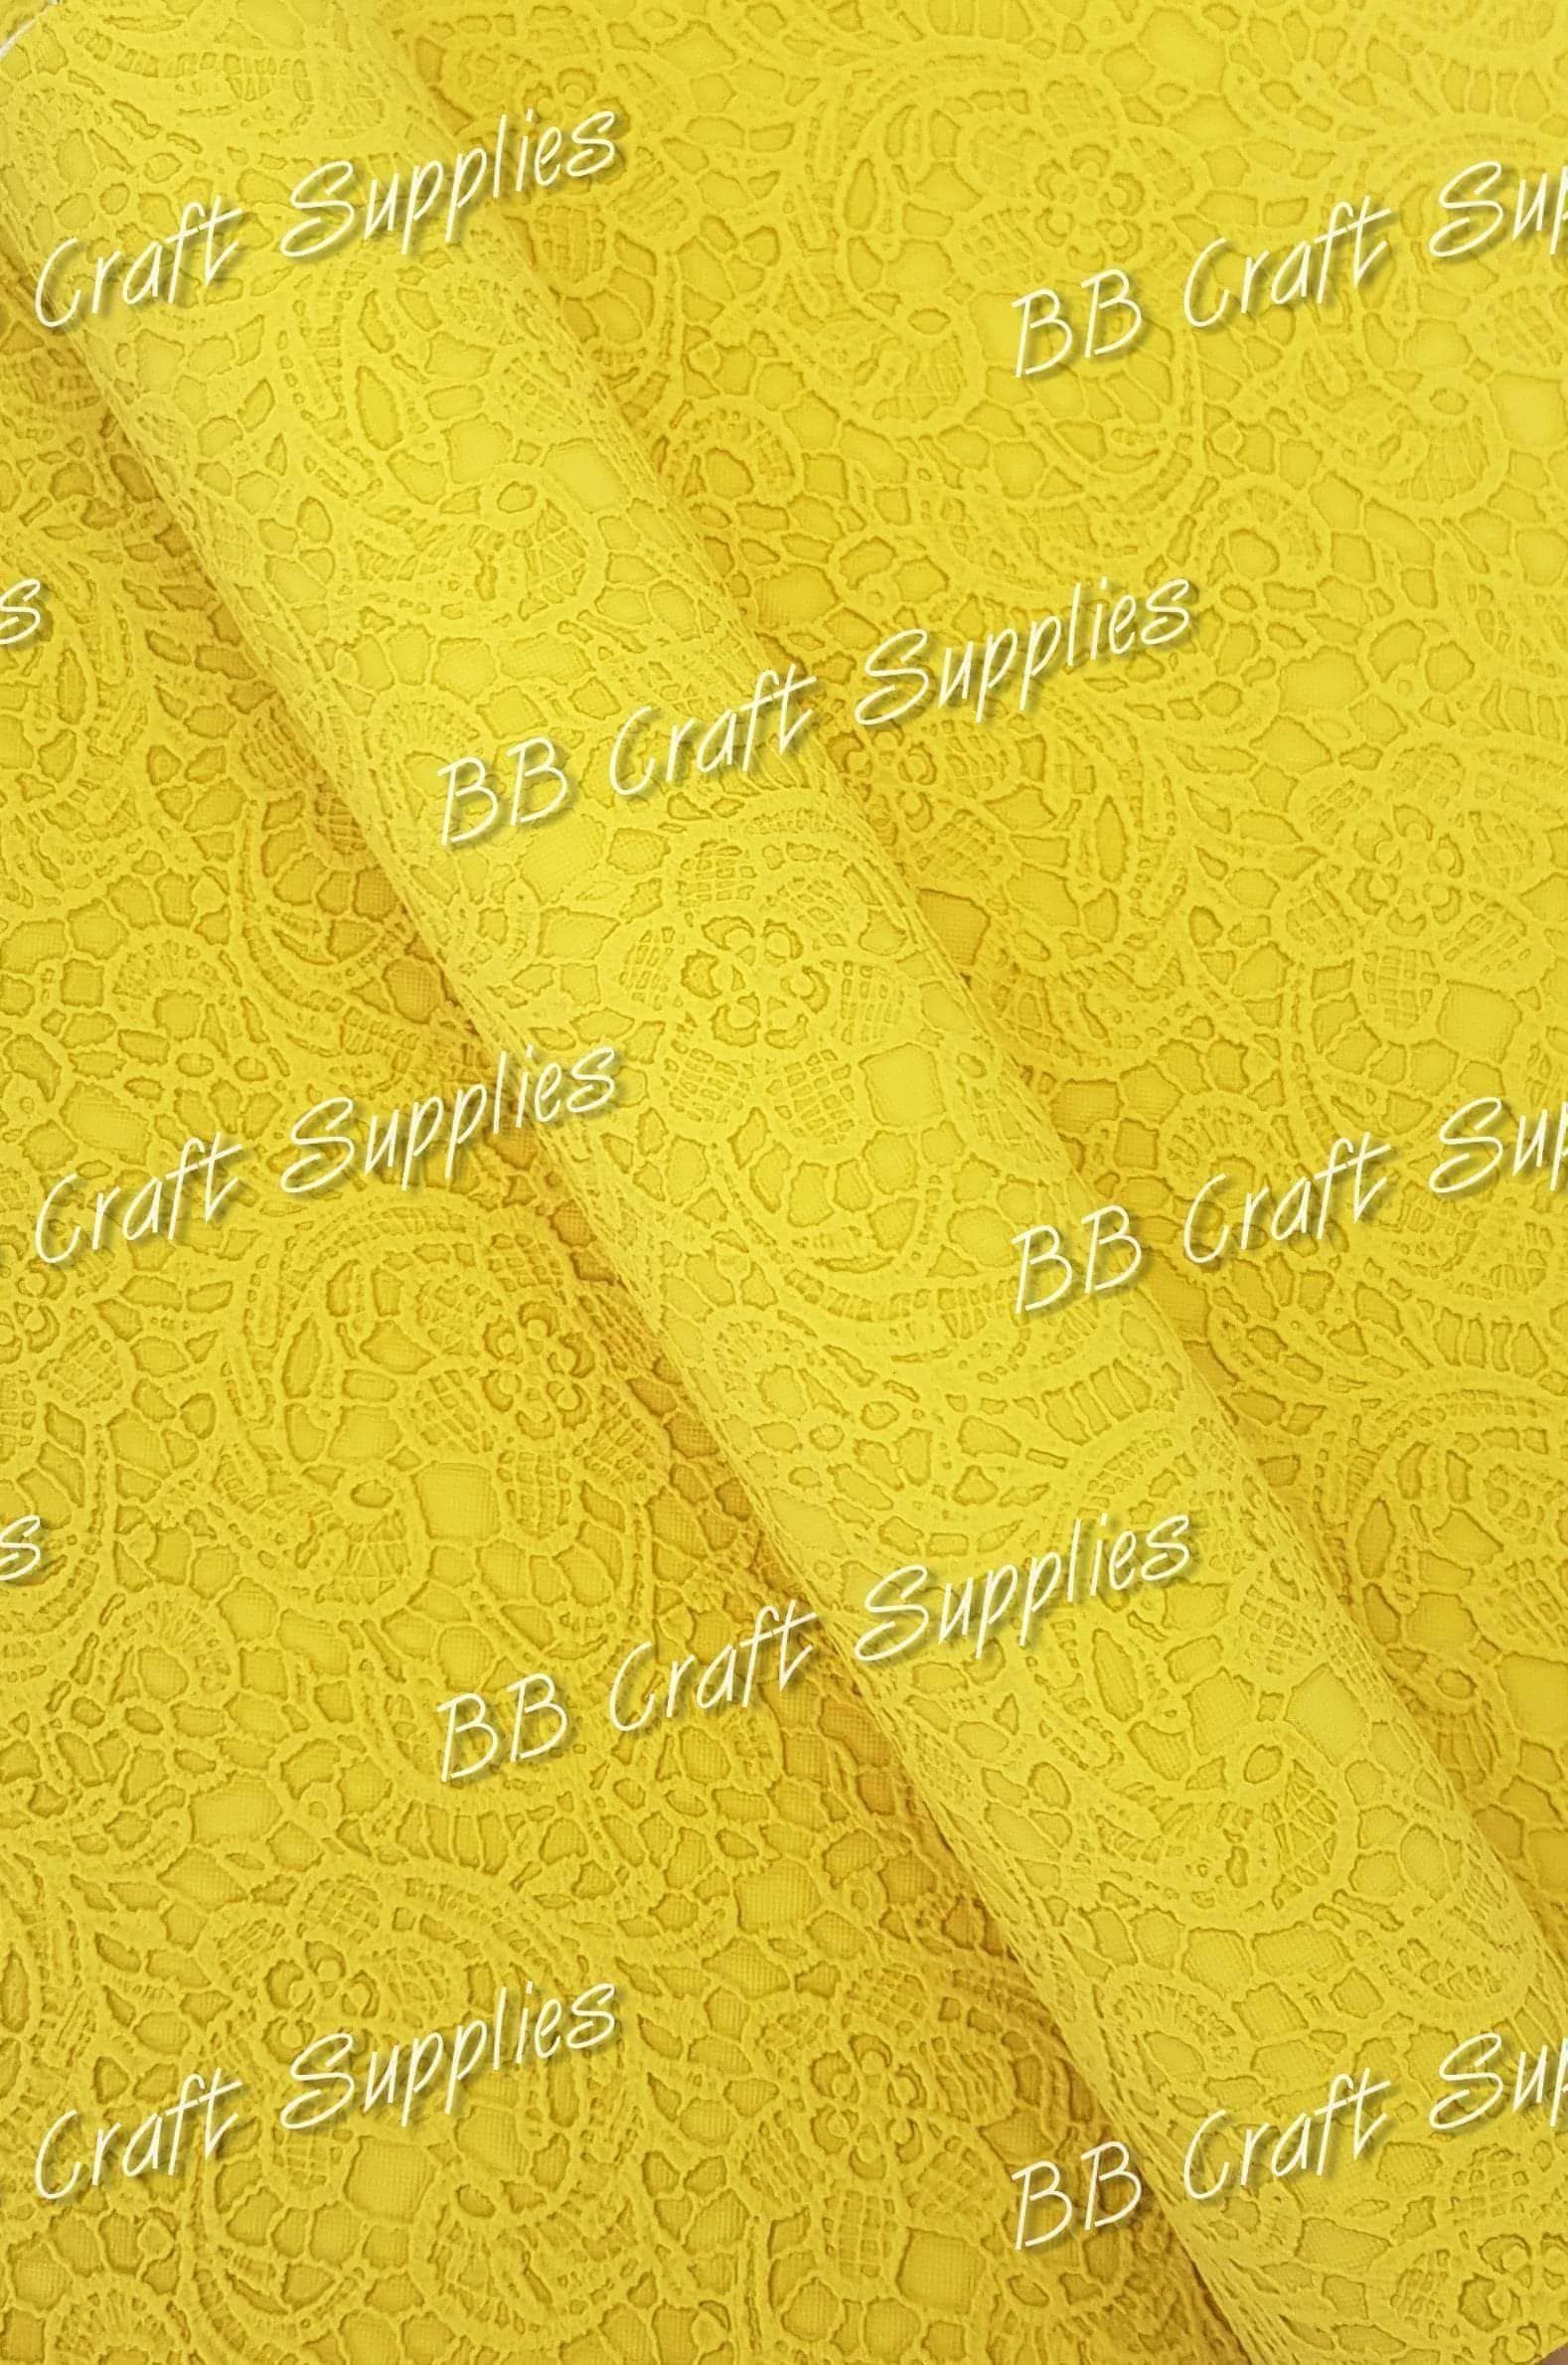 Butter Soft Embossed Lace Yellow - butter, Embossed, Faux, Faux Leather, Lace, Leather, leatherette, soft, Whats new, Yellow - Bare Butler Faux Leather Supplies 